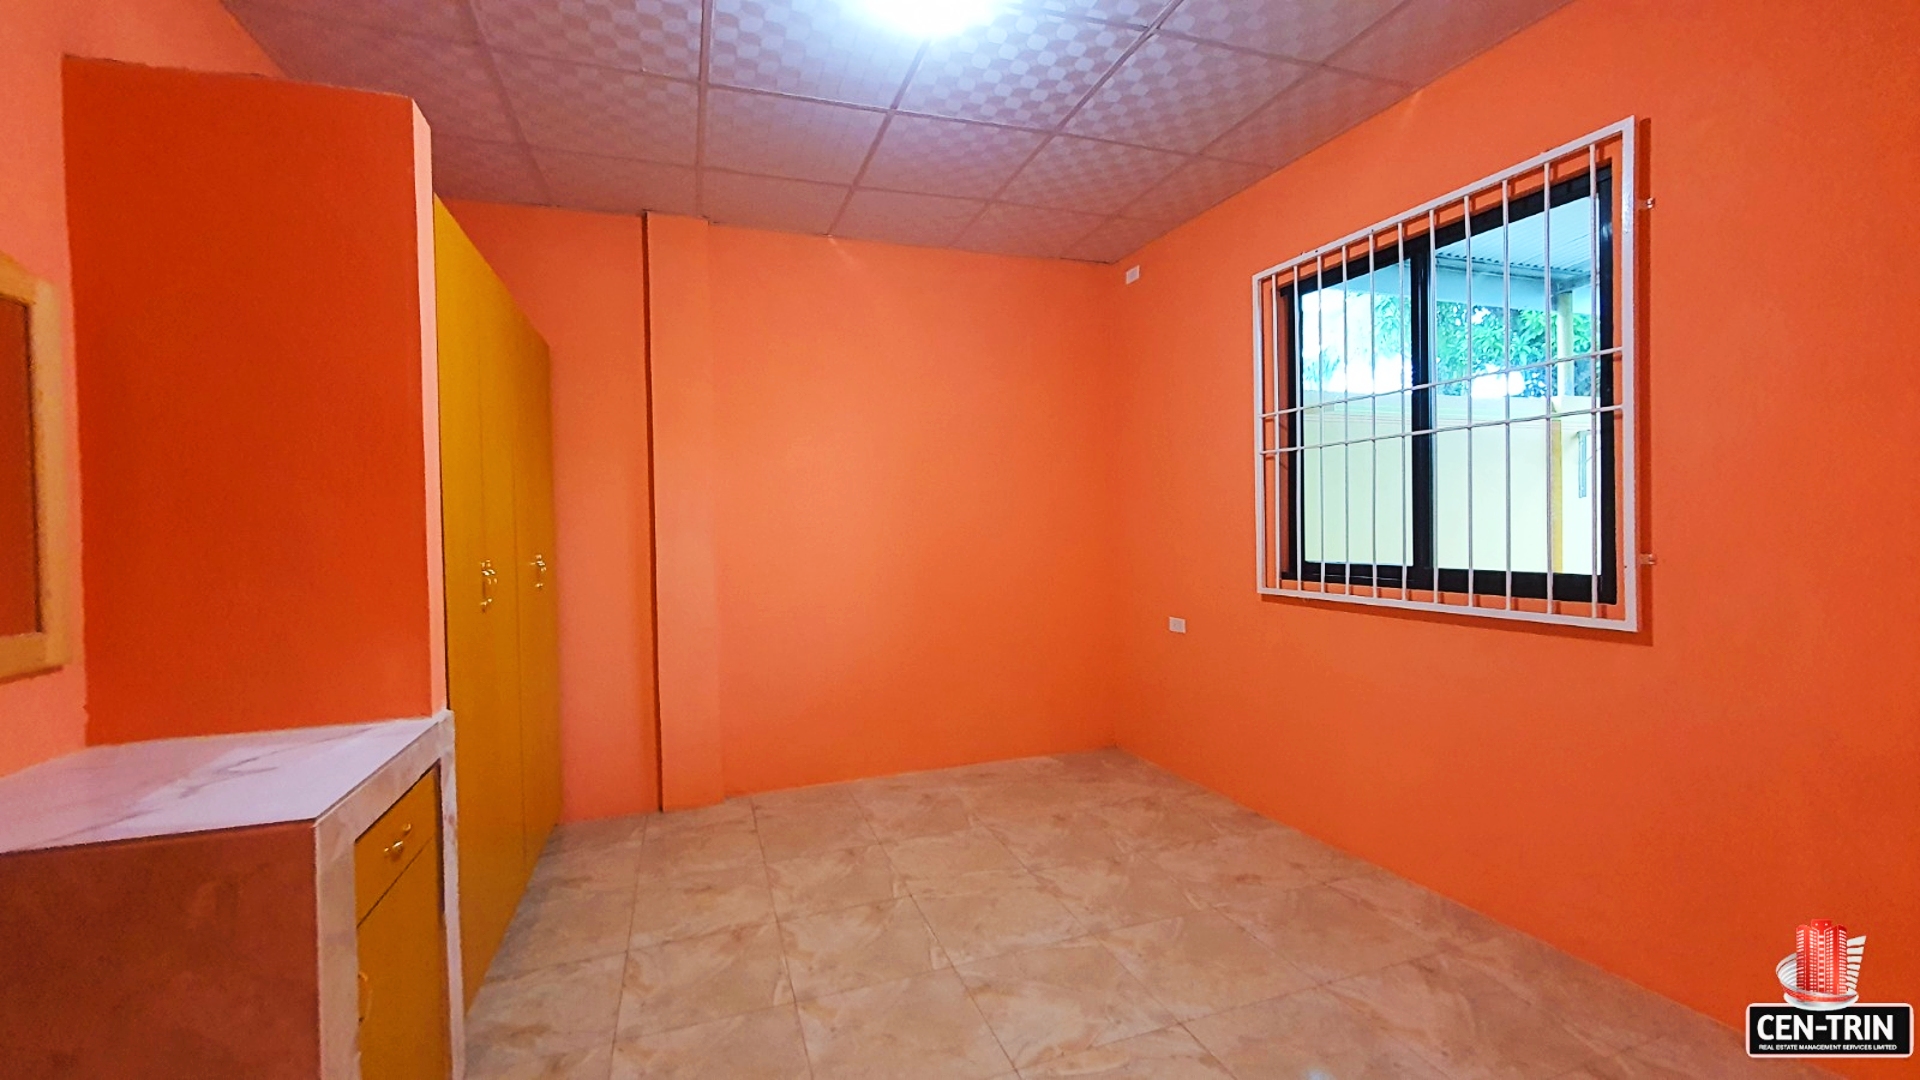 Image of an orange room with a window